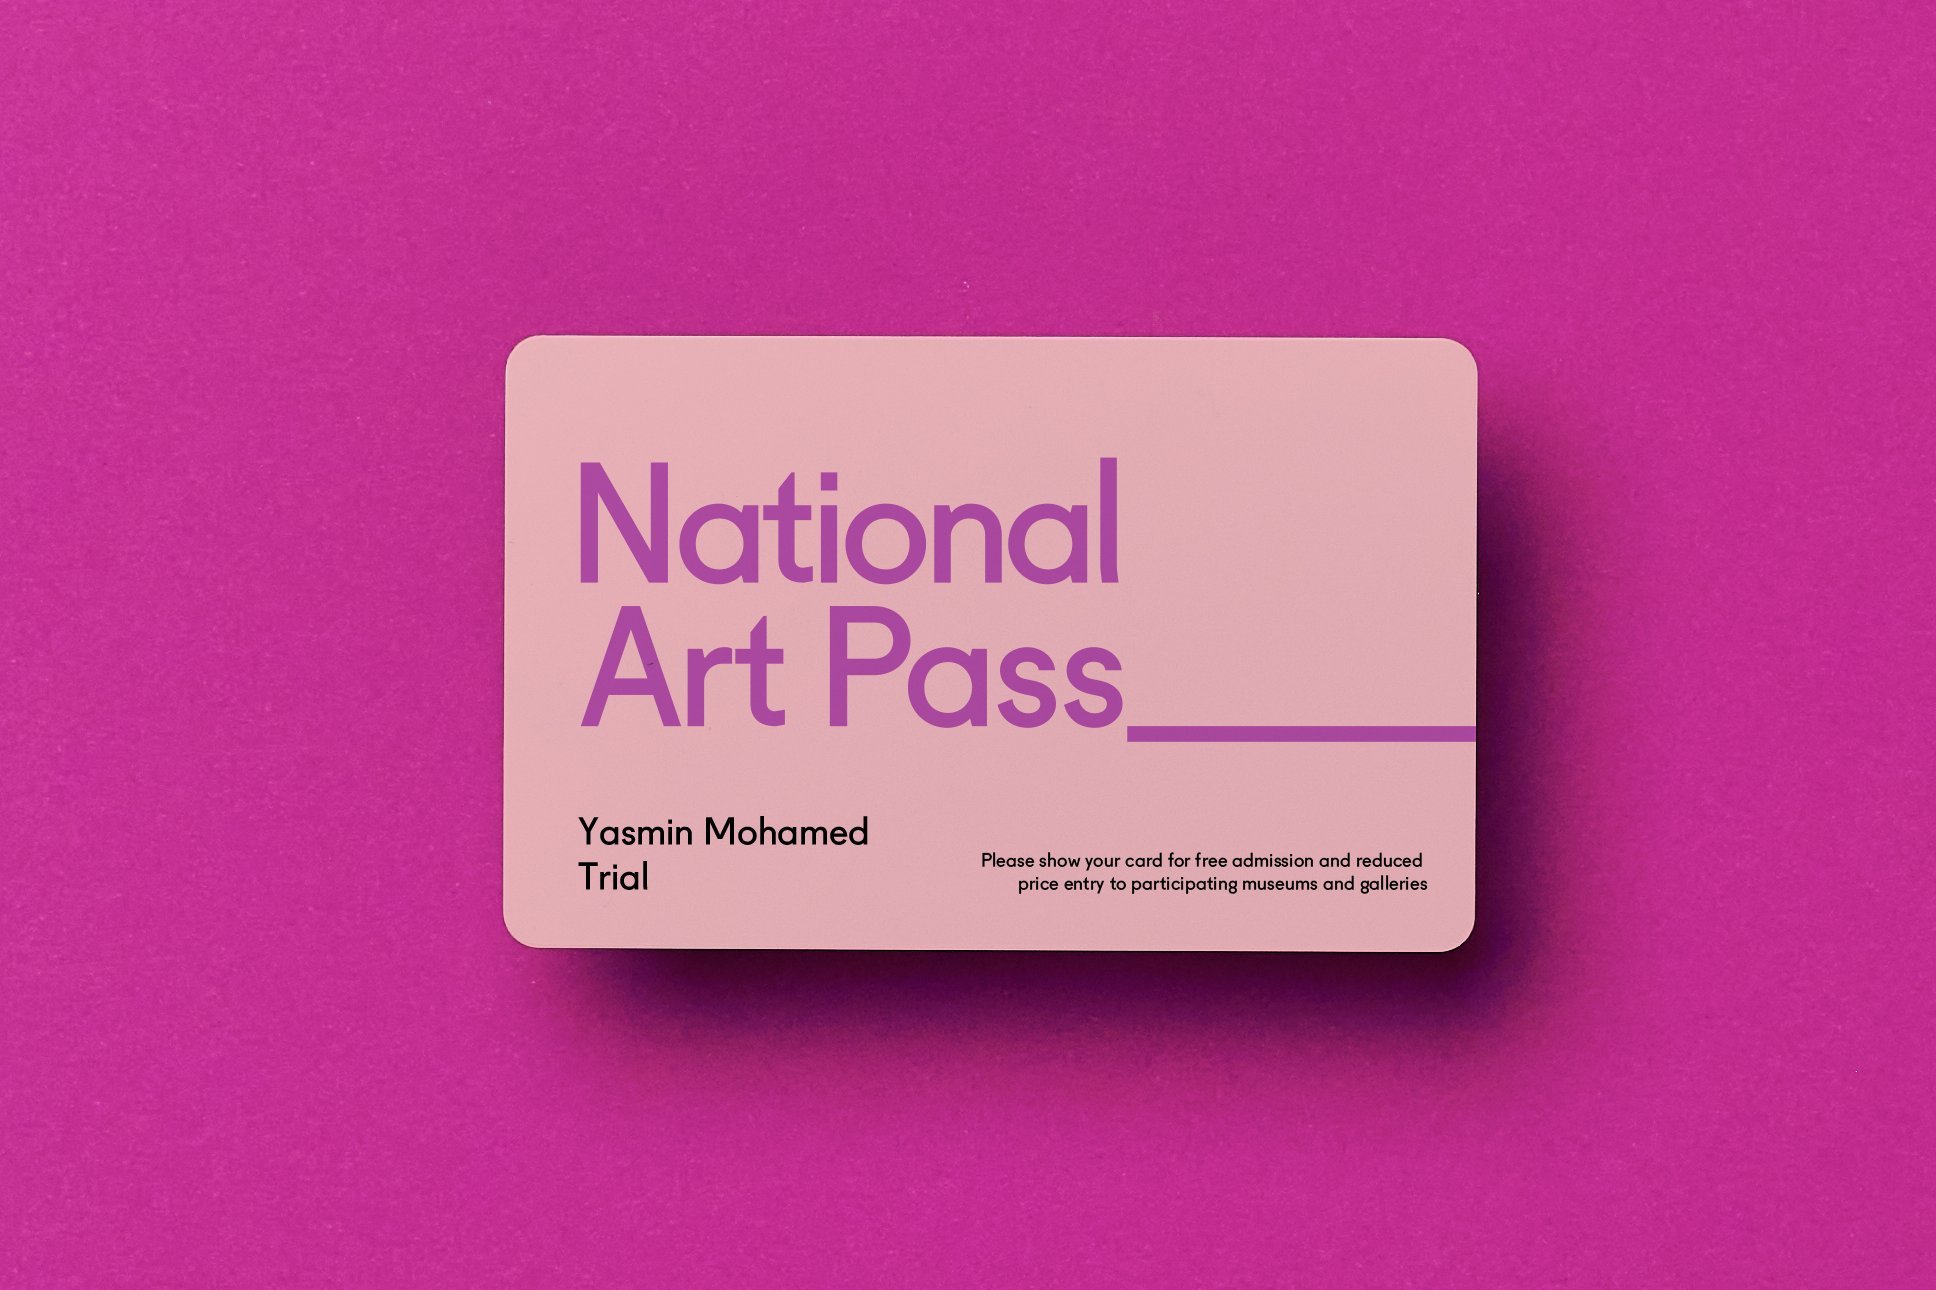 A National Art Pass, which gives free entry to hundreds of museums, galleries and historic houses as well as 50 per cent off major exhibitions